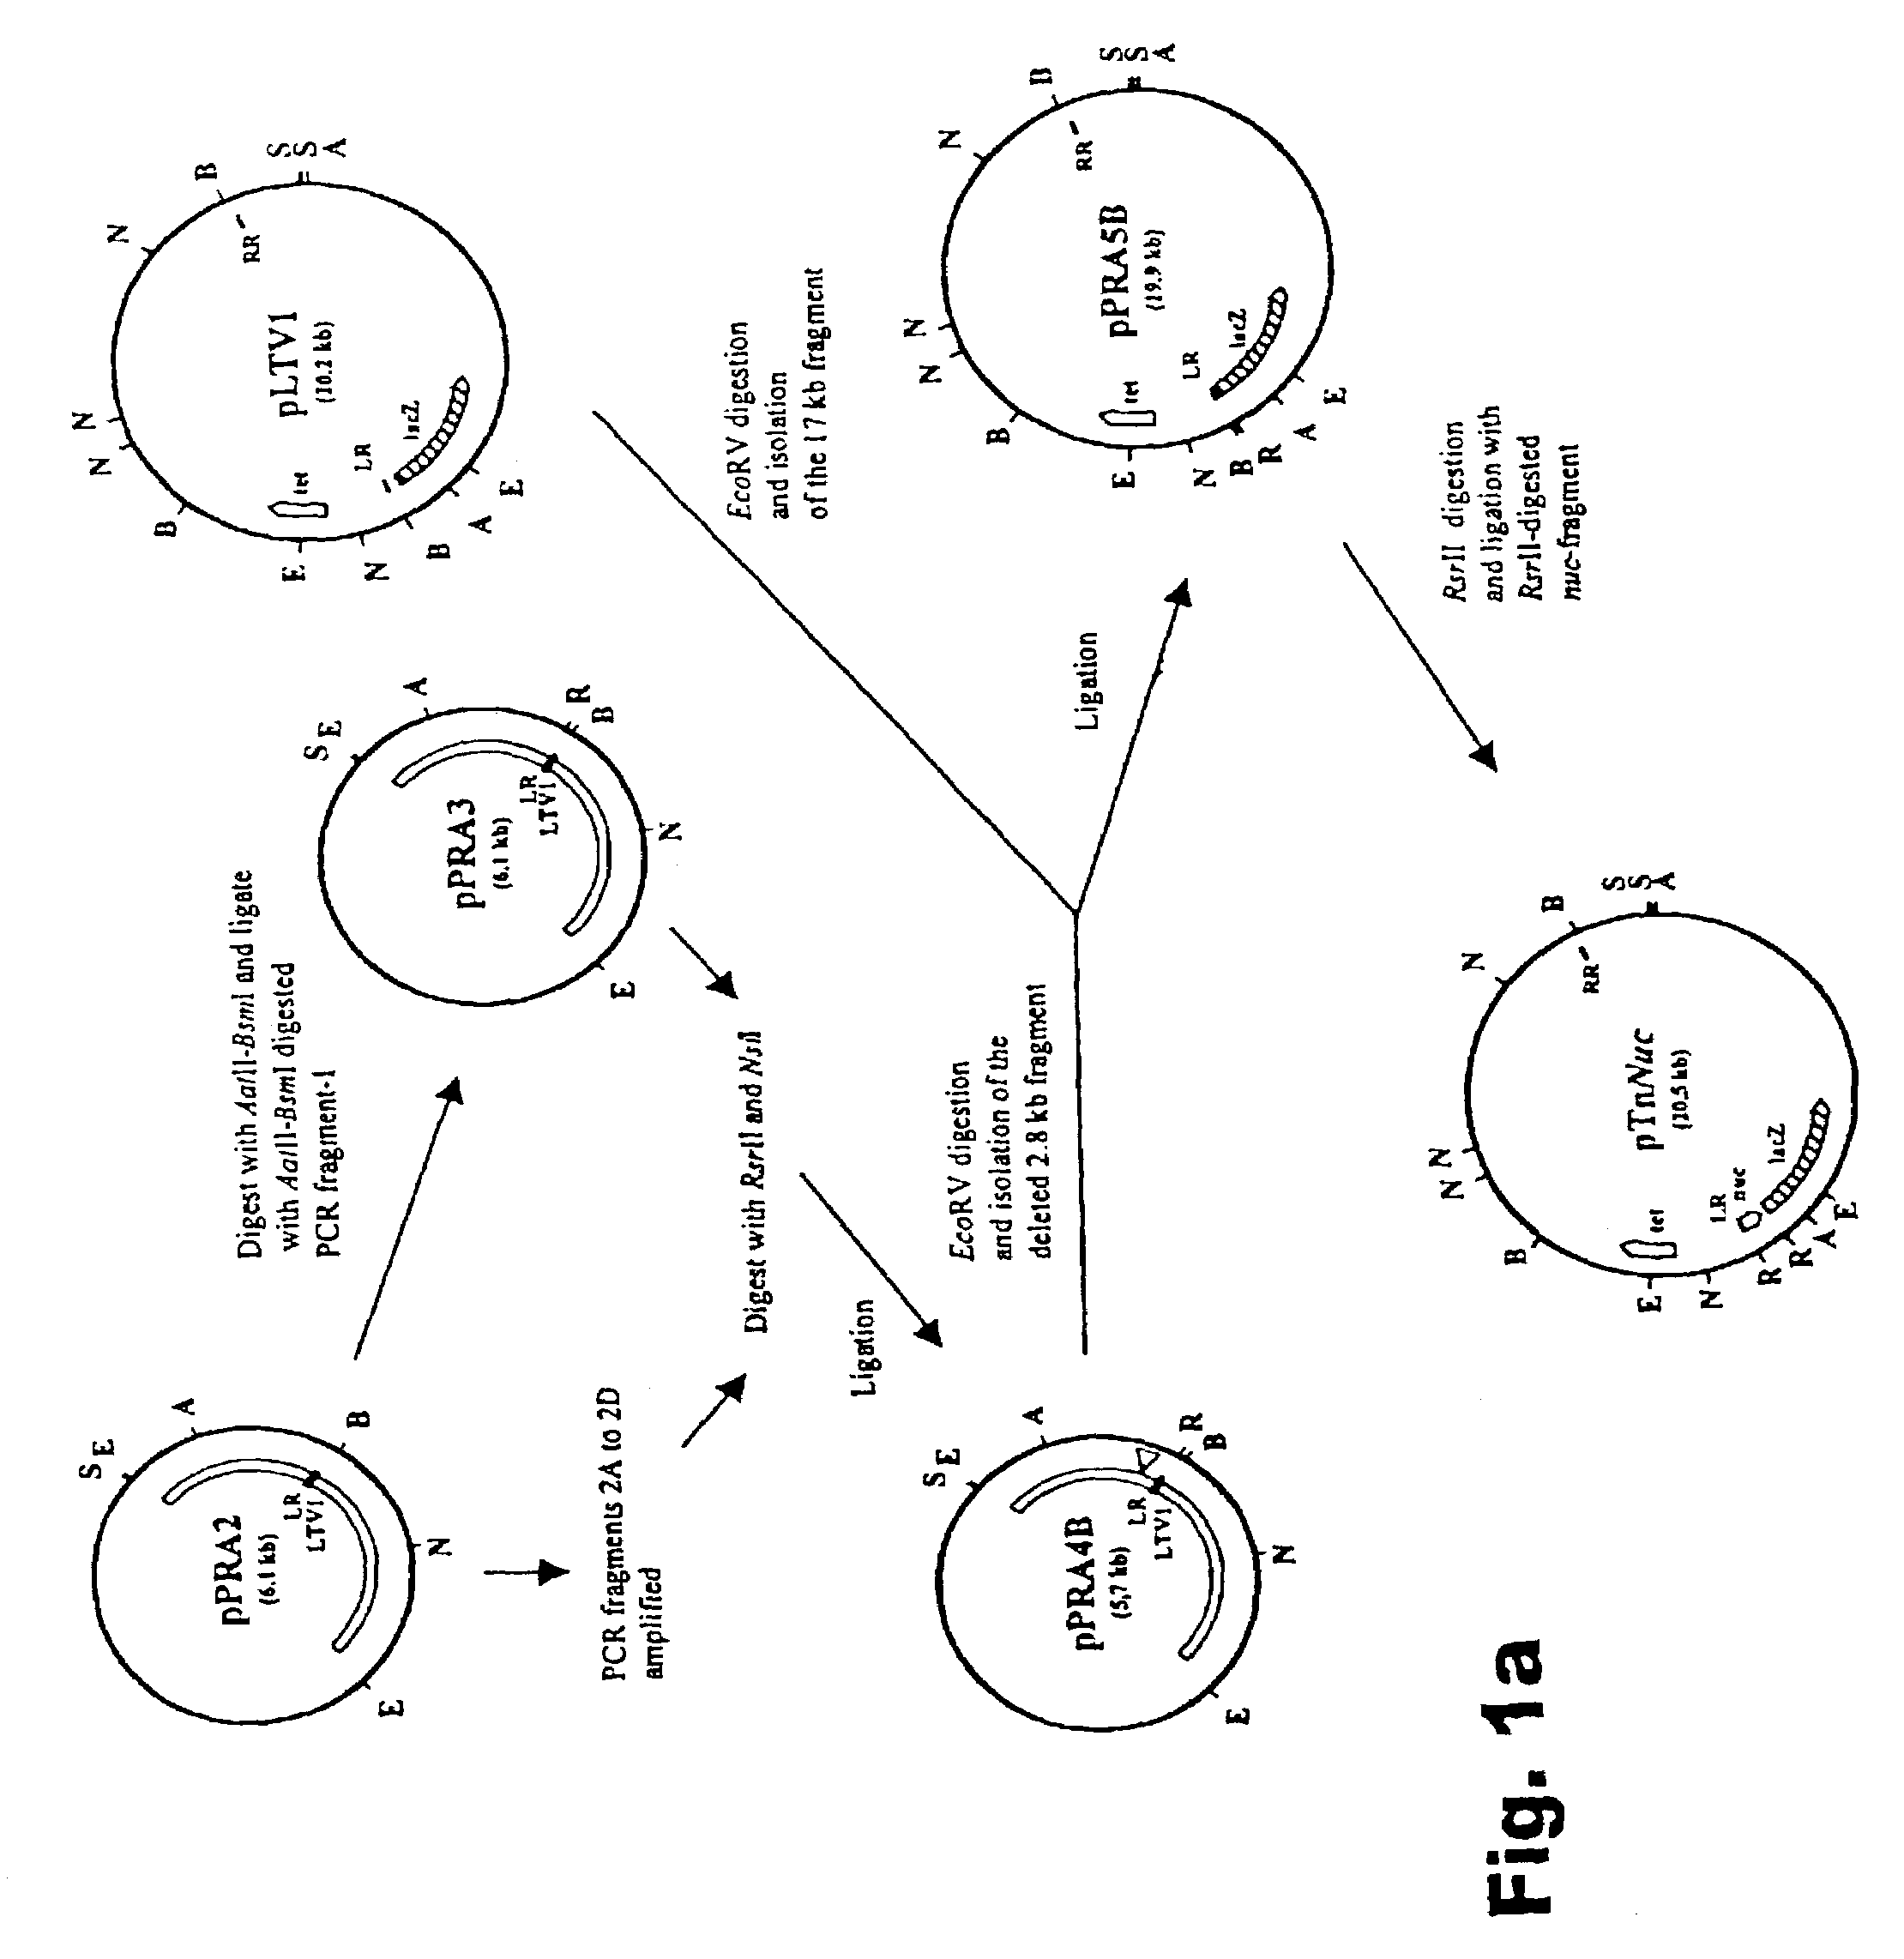 Method of isolating secretion signals in lactic acid bacteria and novel secretion signals isolated from Lactococcus lactis